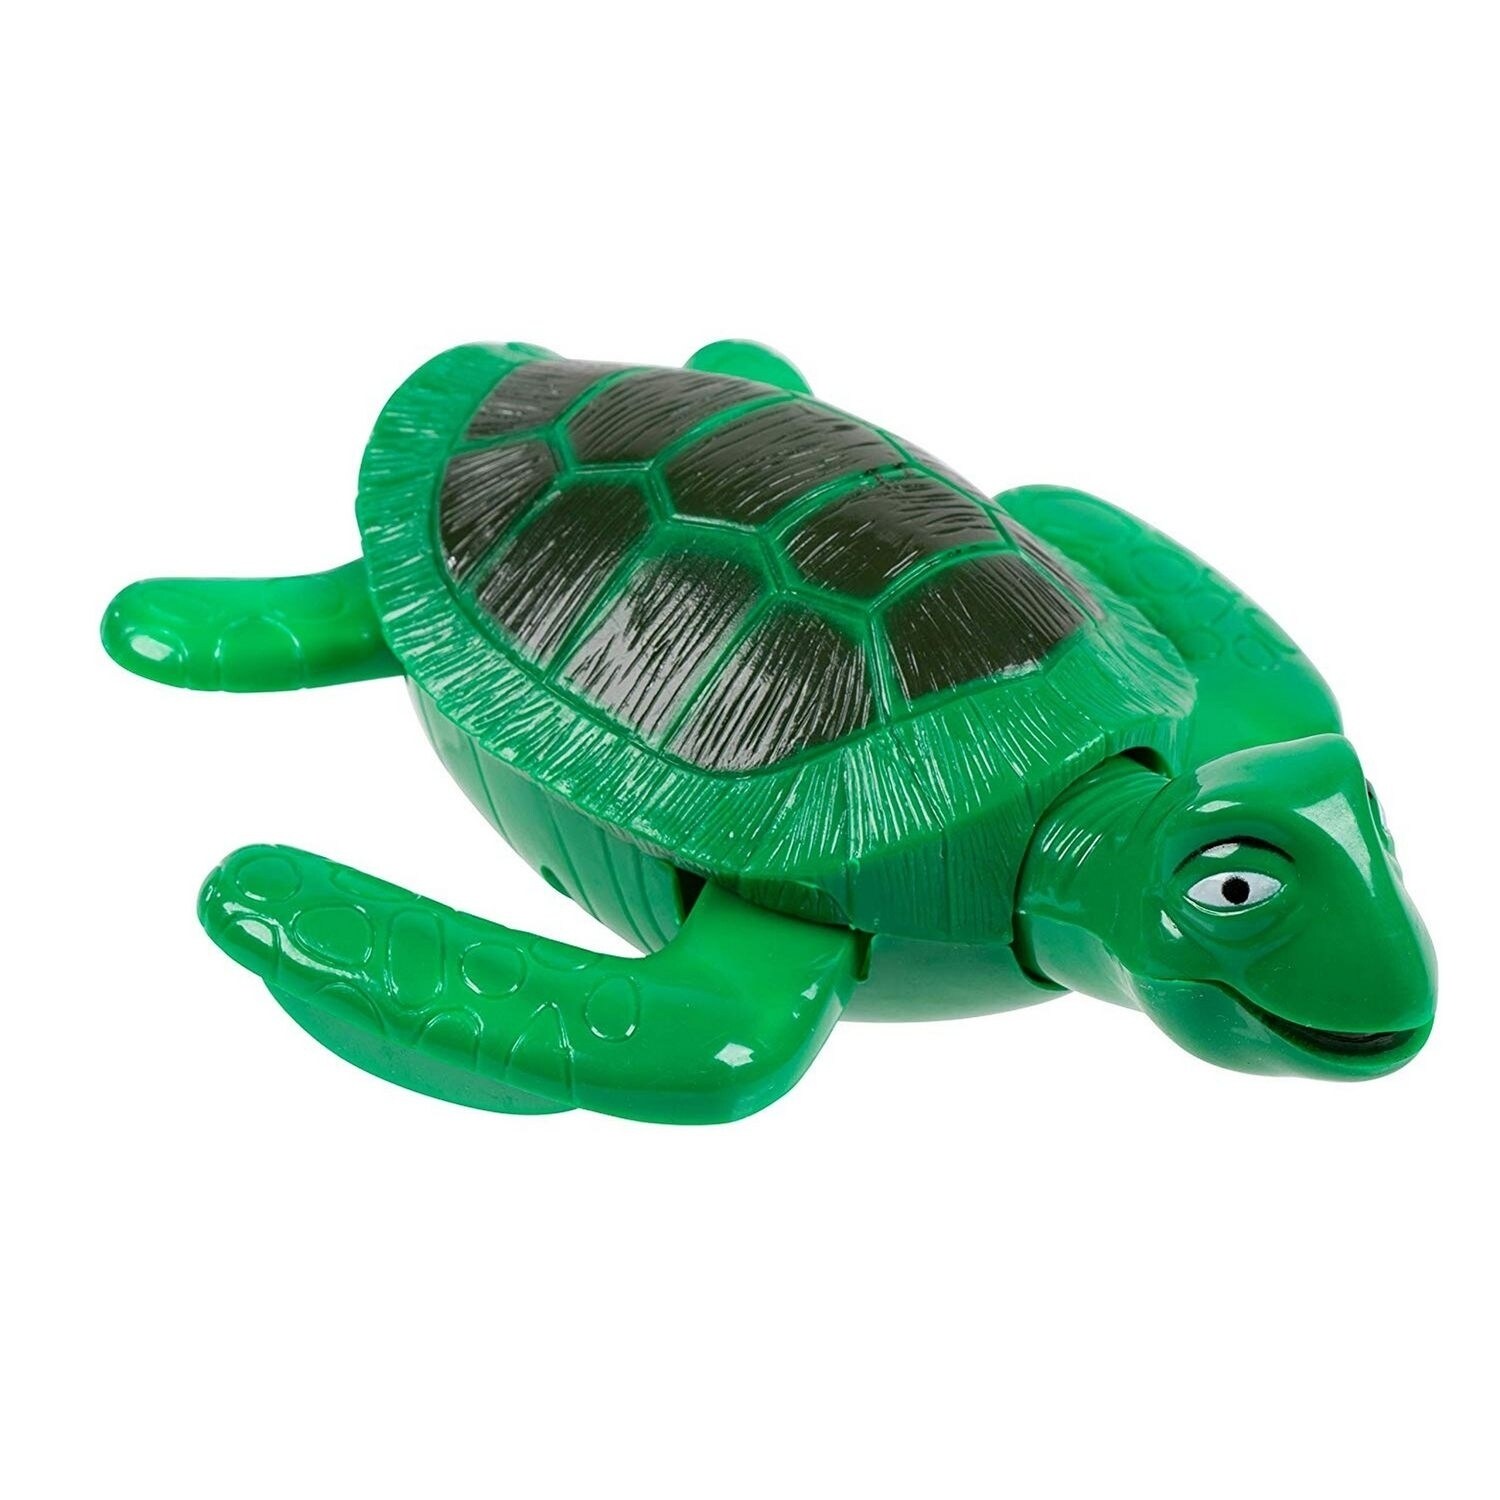 wind up swimming bath toys